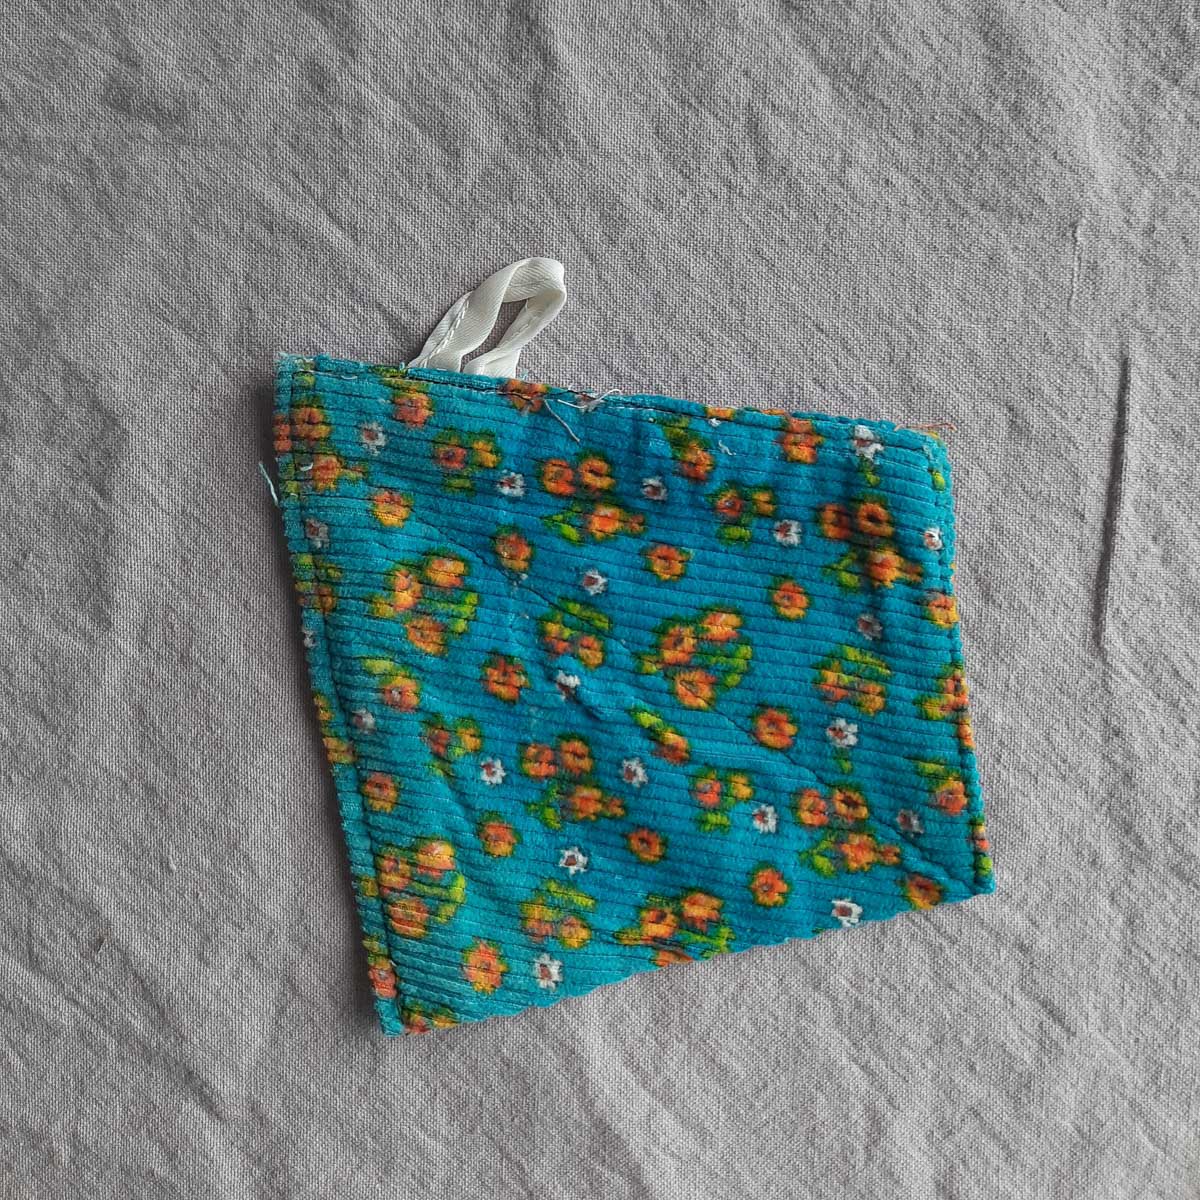 A potholder from leftover materials